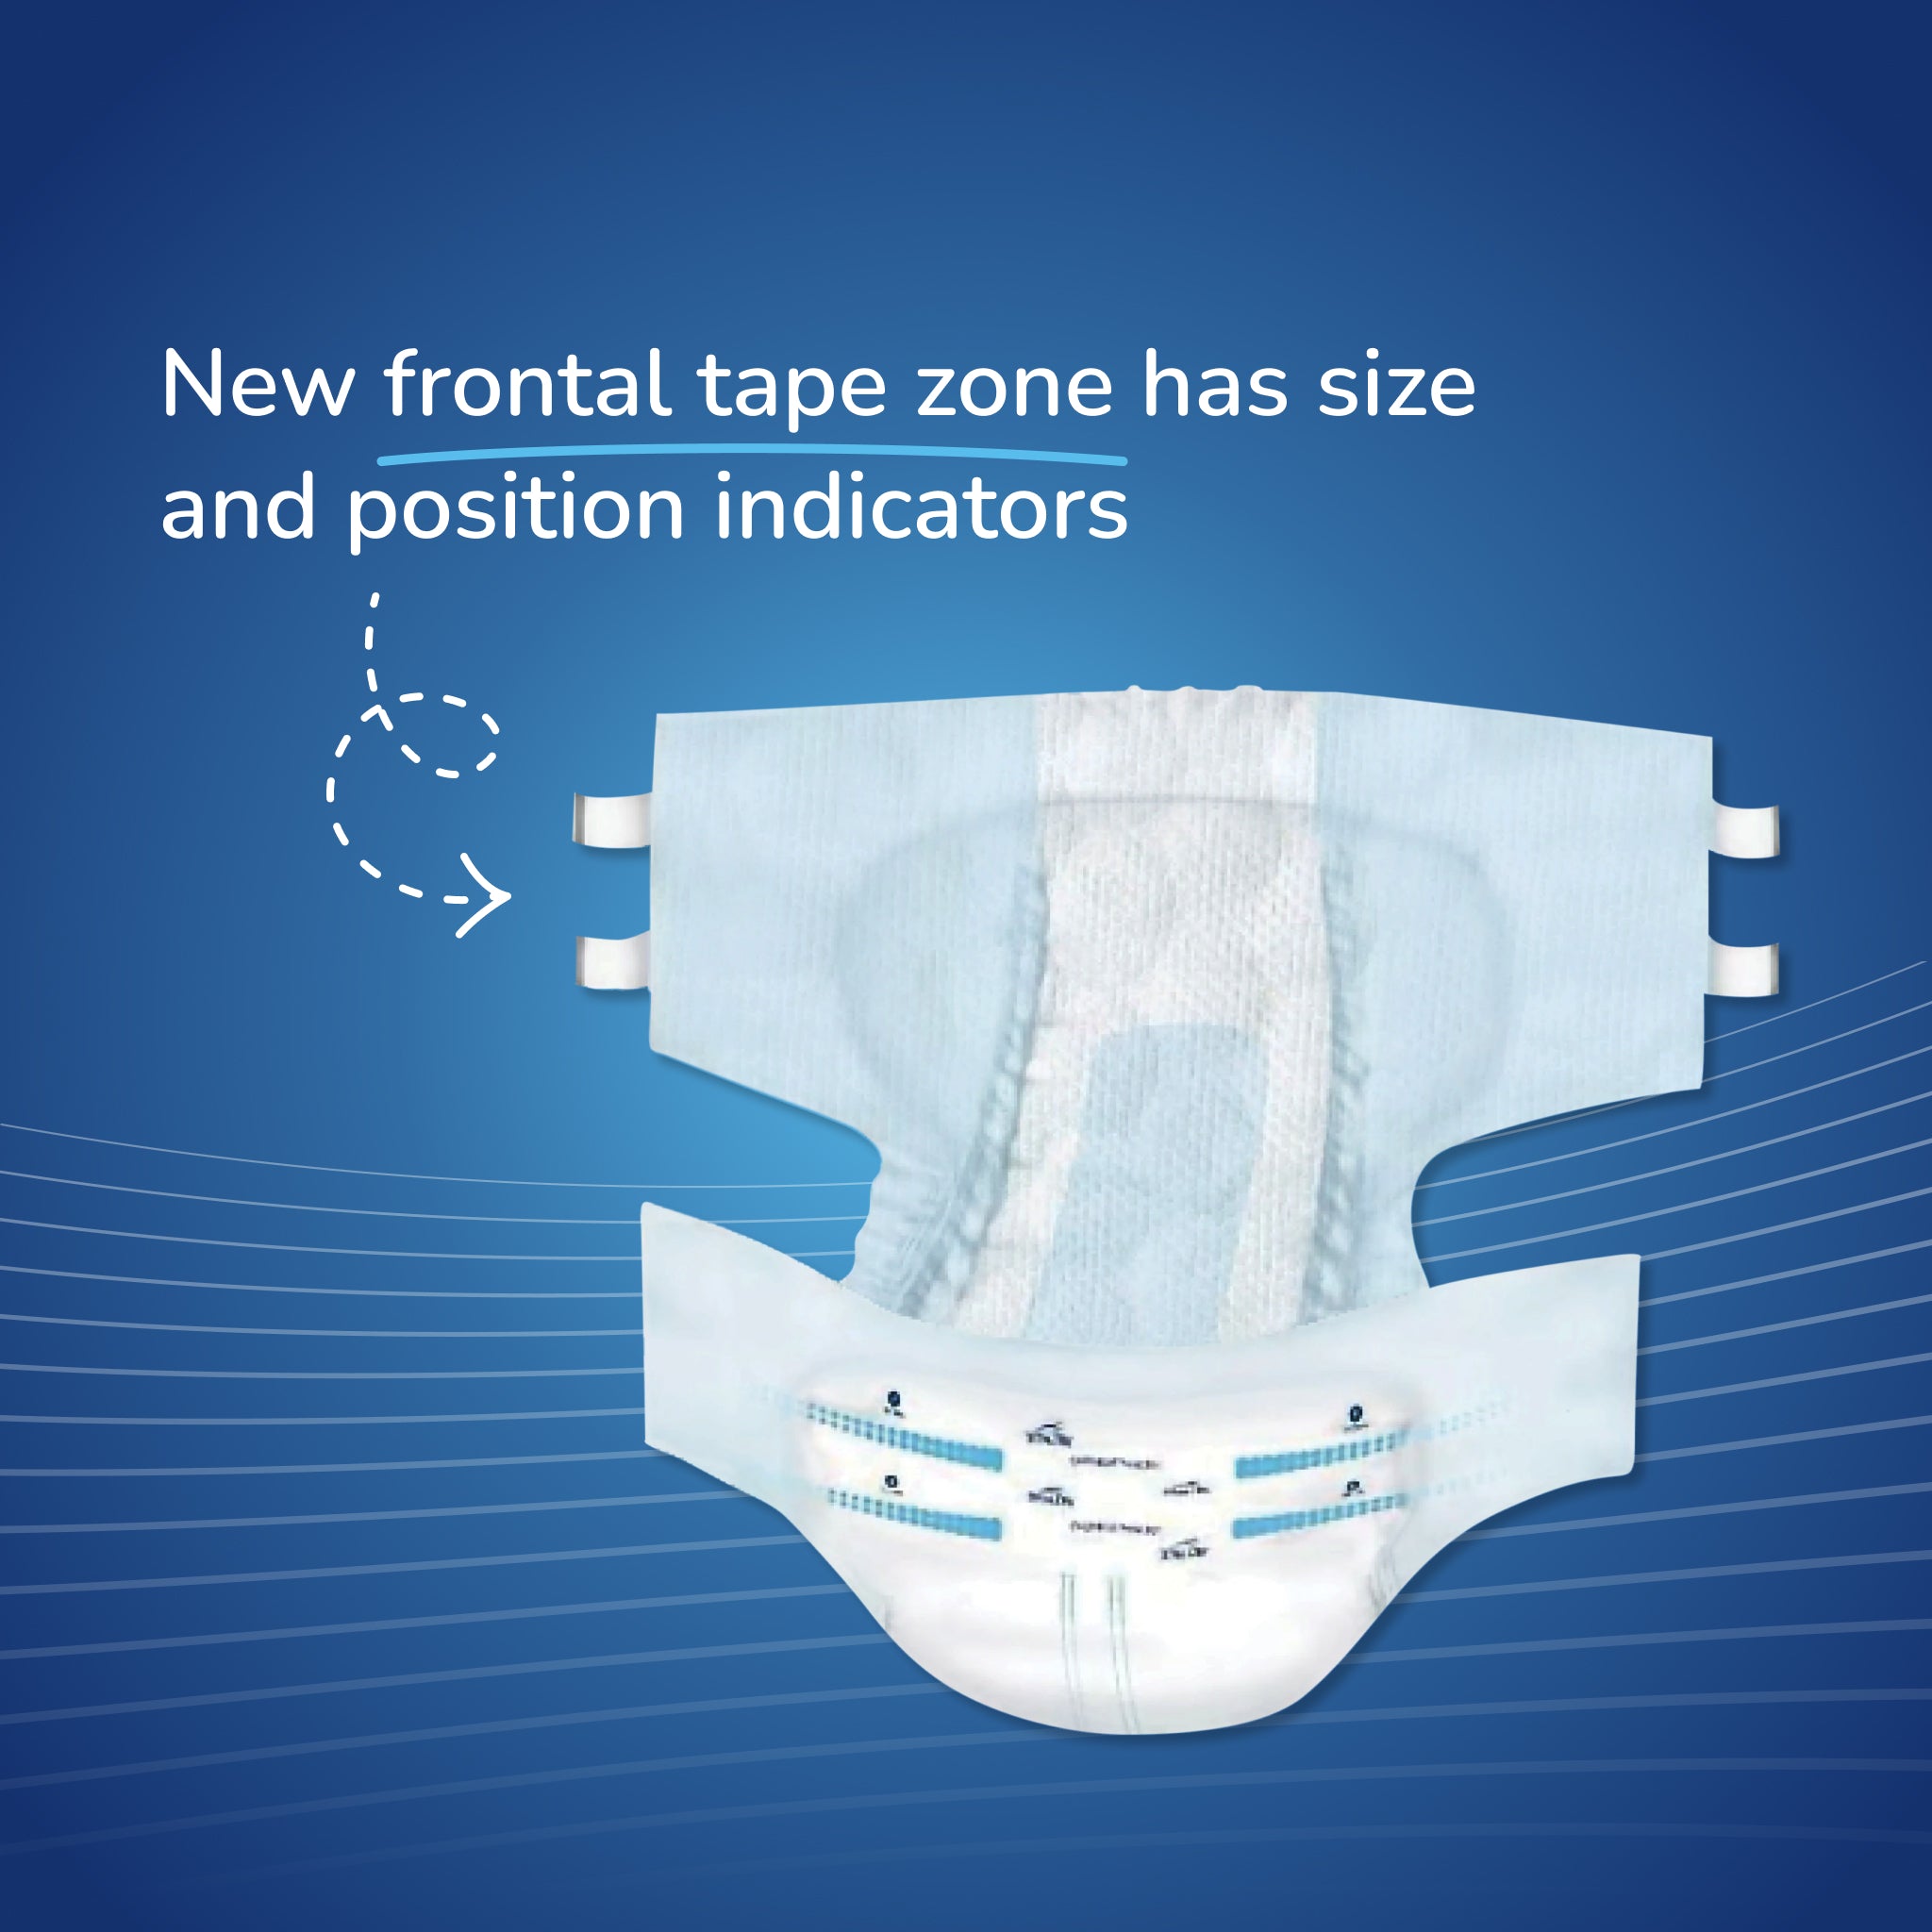 TotalDry - Breathable Fitted Briefs for moderate to heavy incontinence -  TotalDry